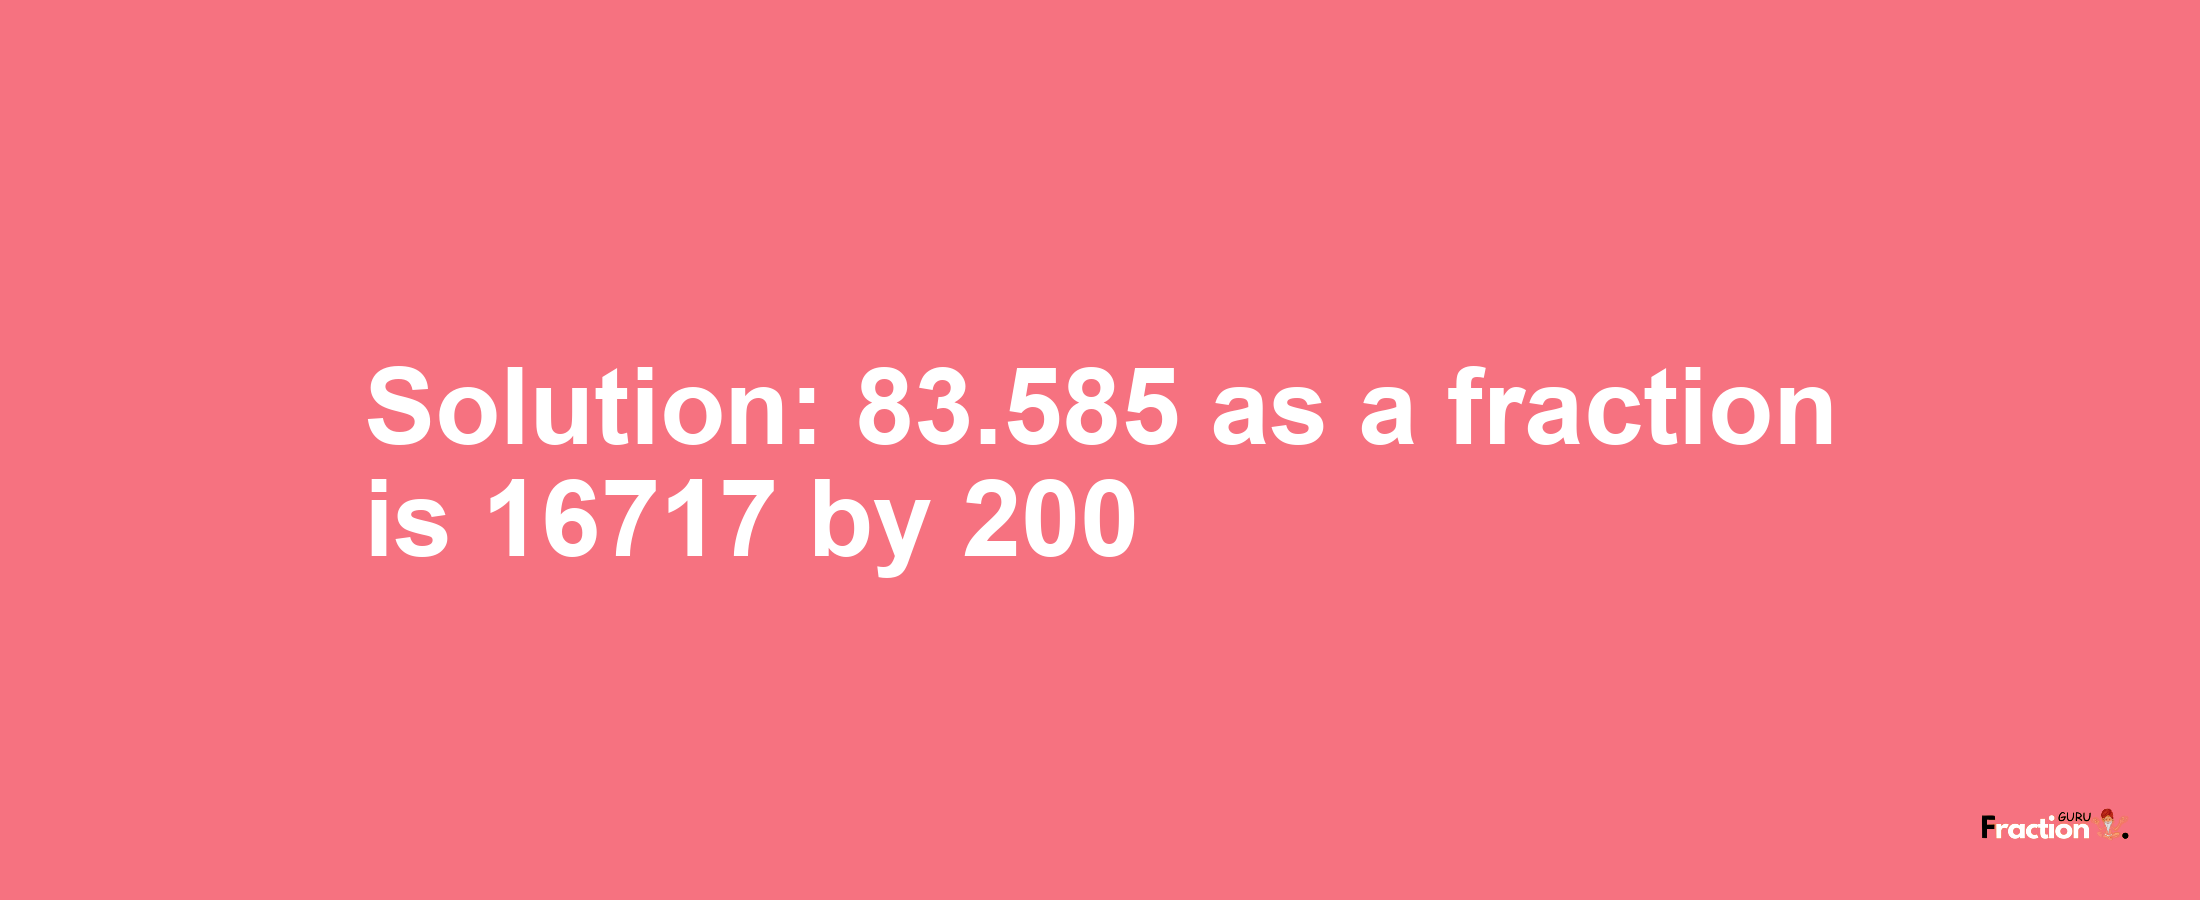 Solution:83.585 as a fraction is 16717/200